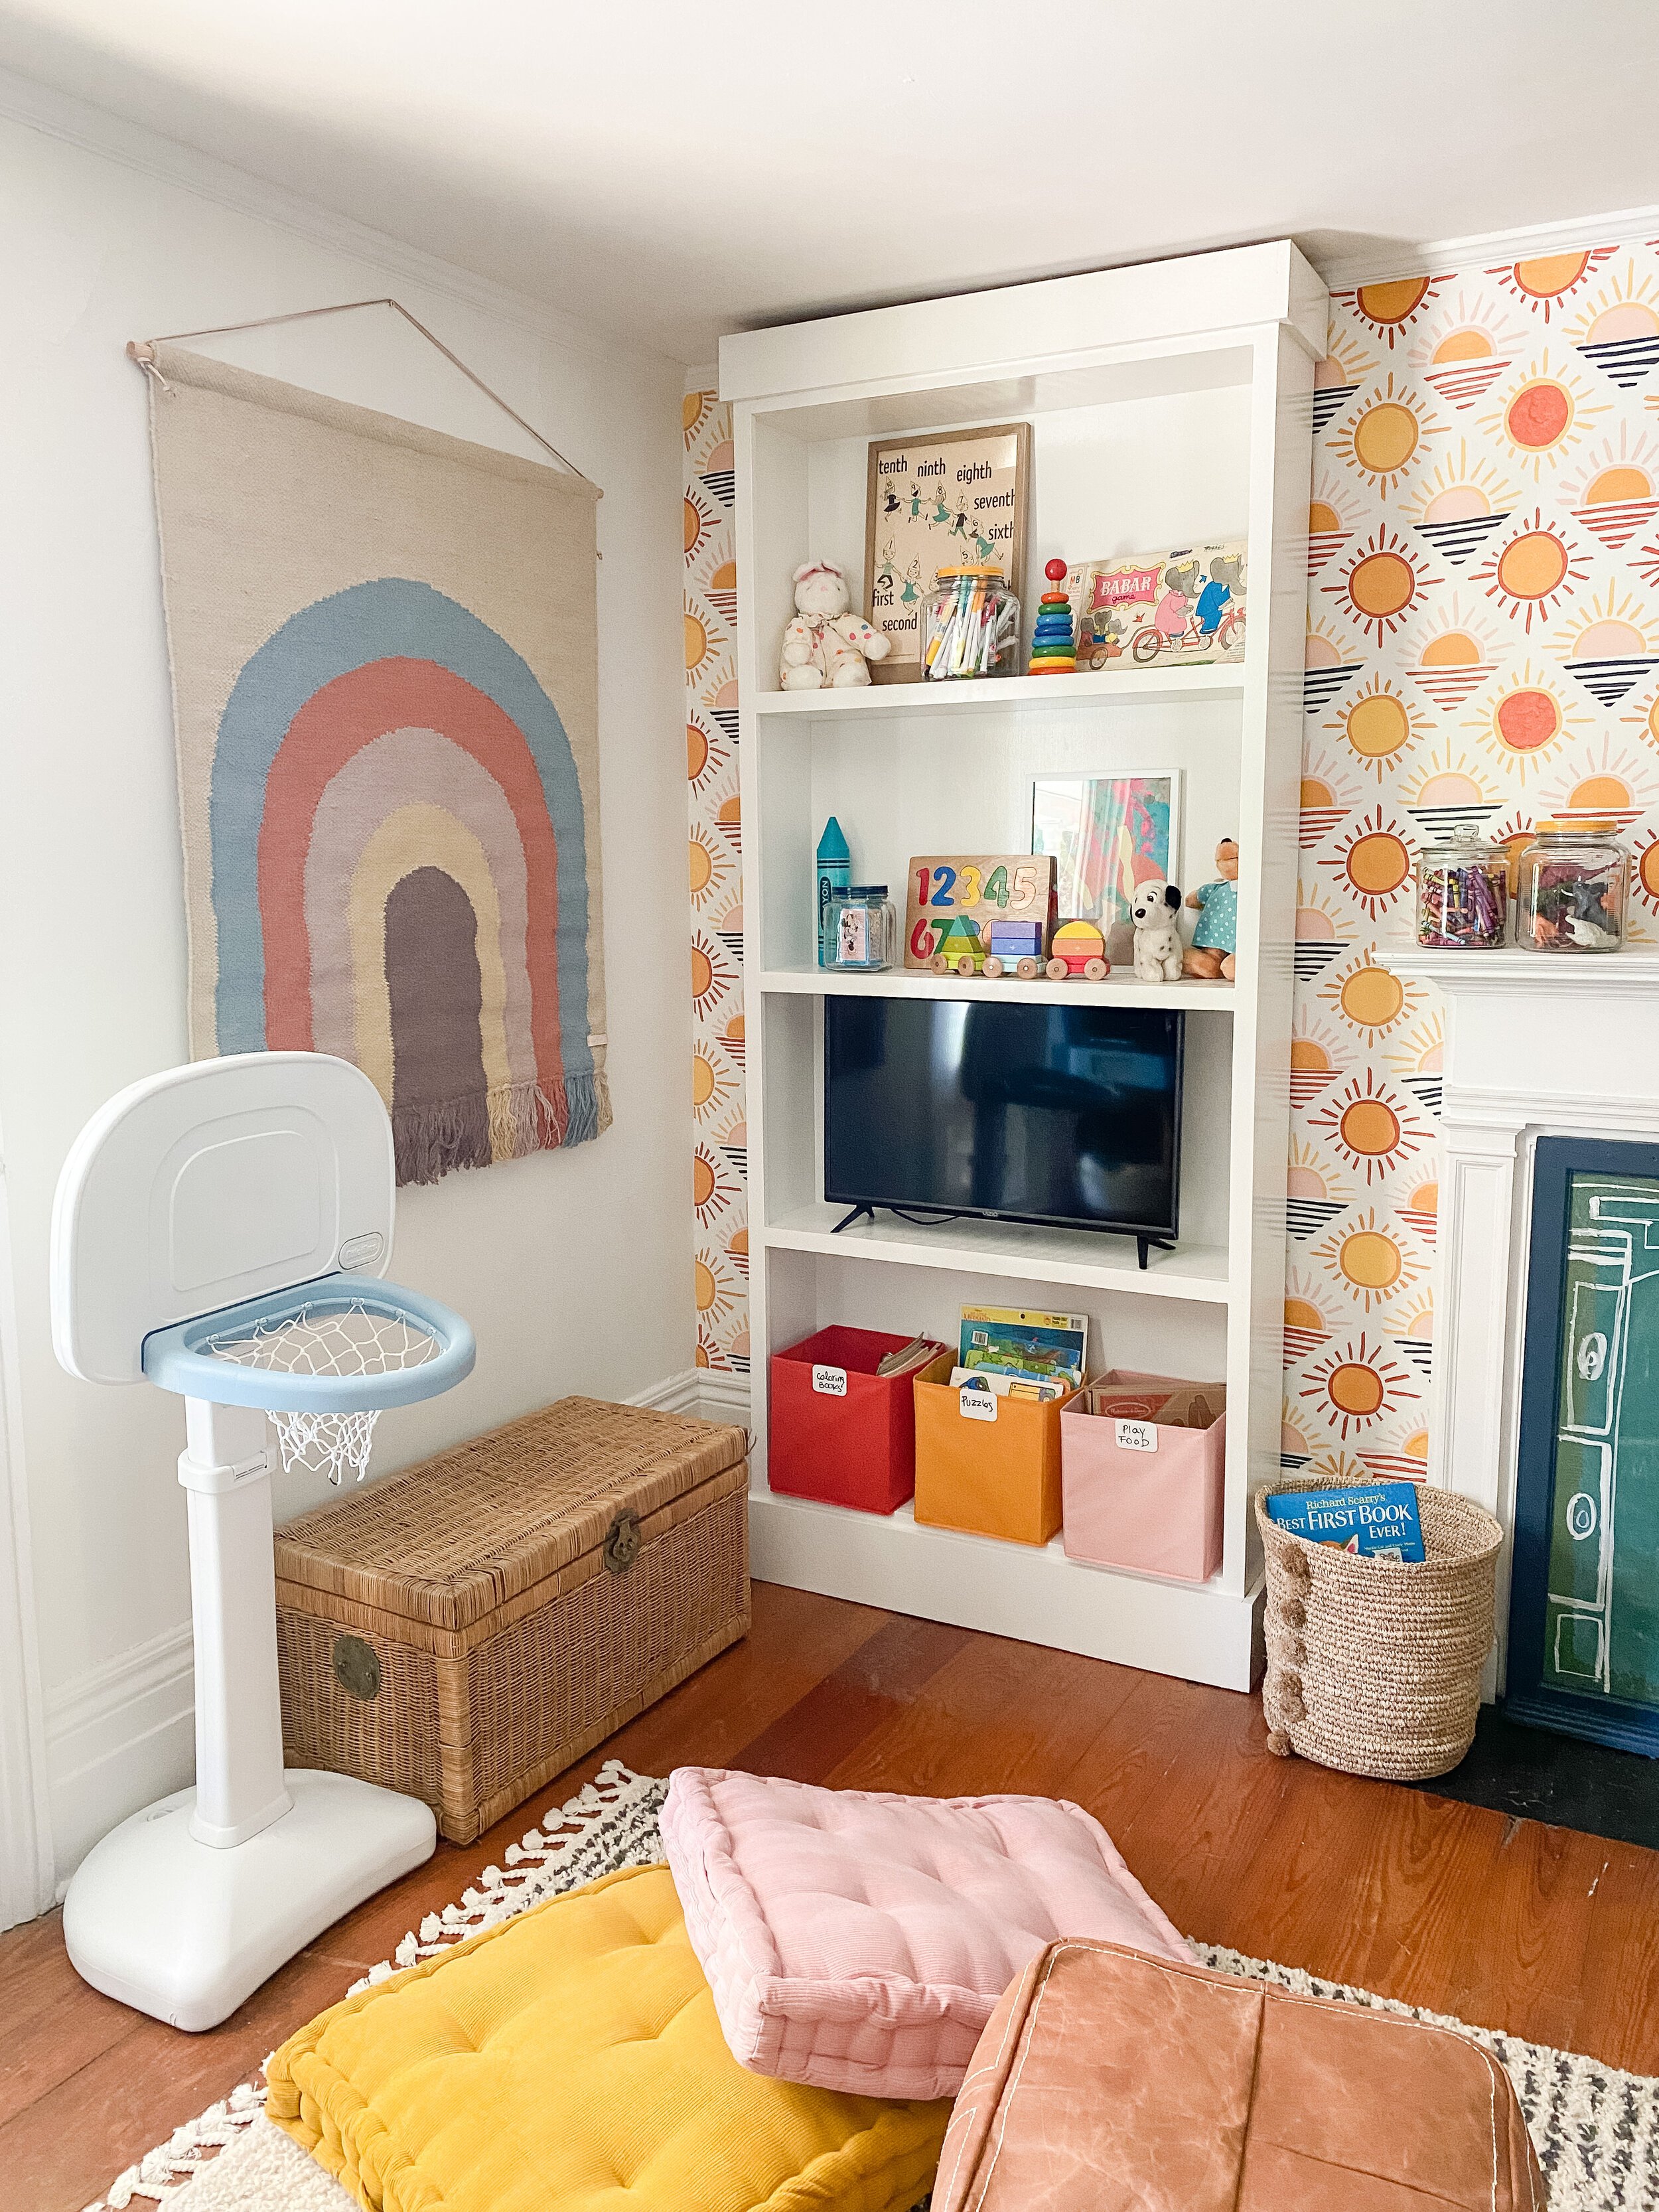 Our Playroom Reveal – DIY Details & Storage Solutions!